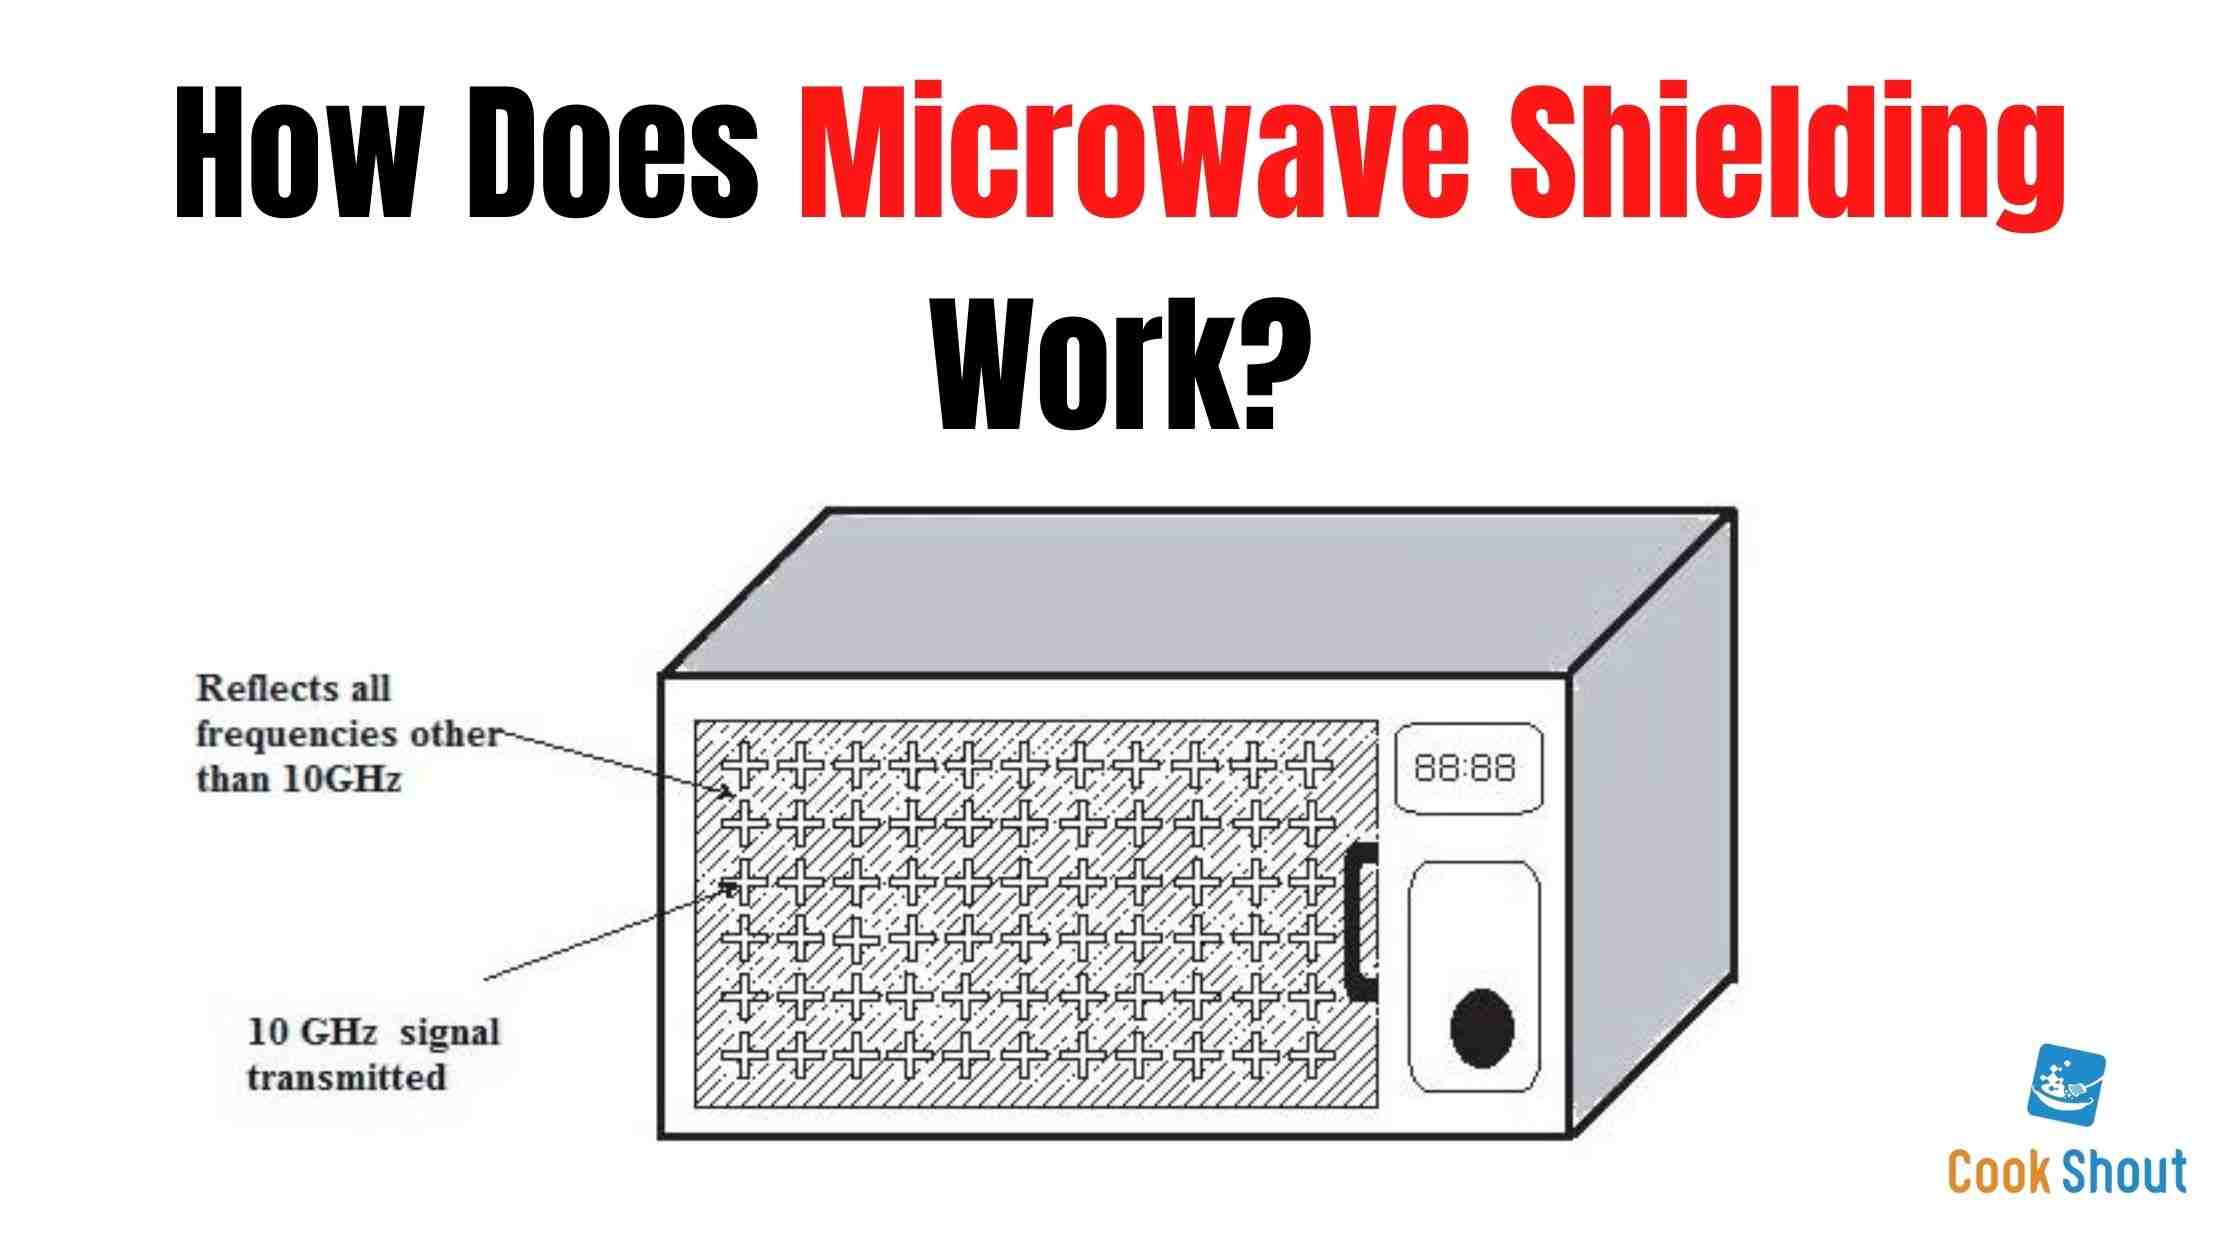 How Does Microwave Shielding Work